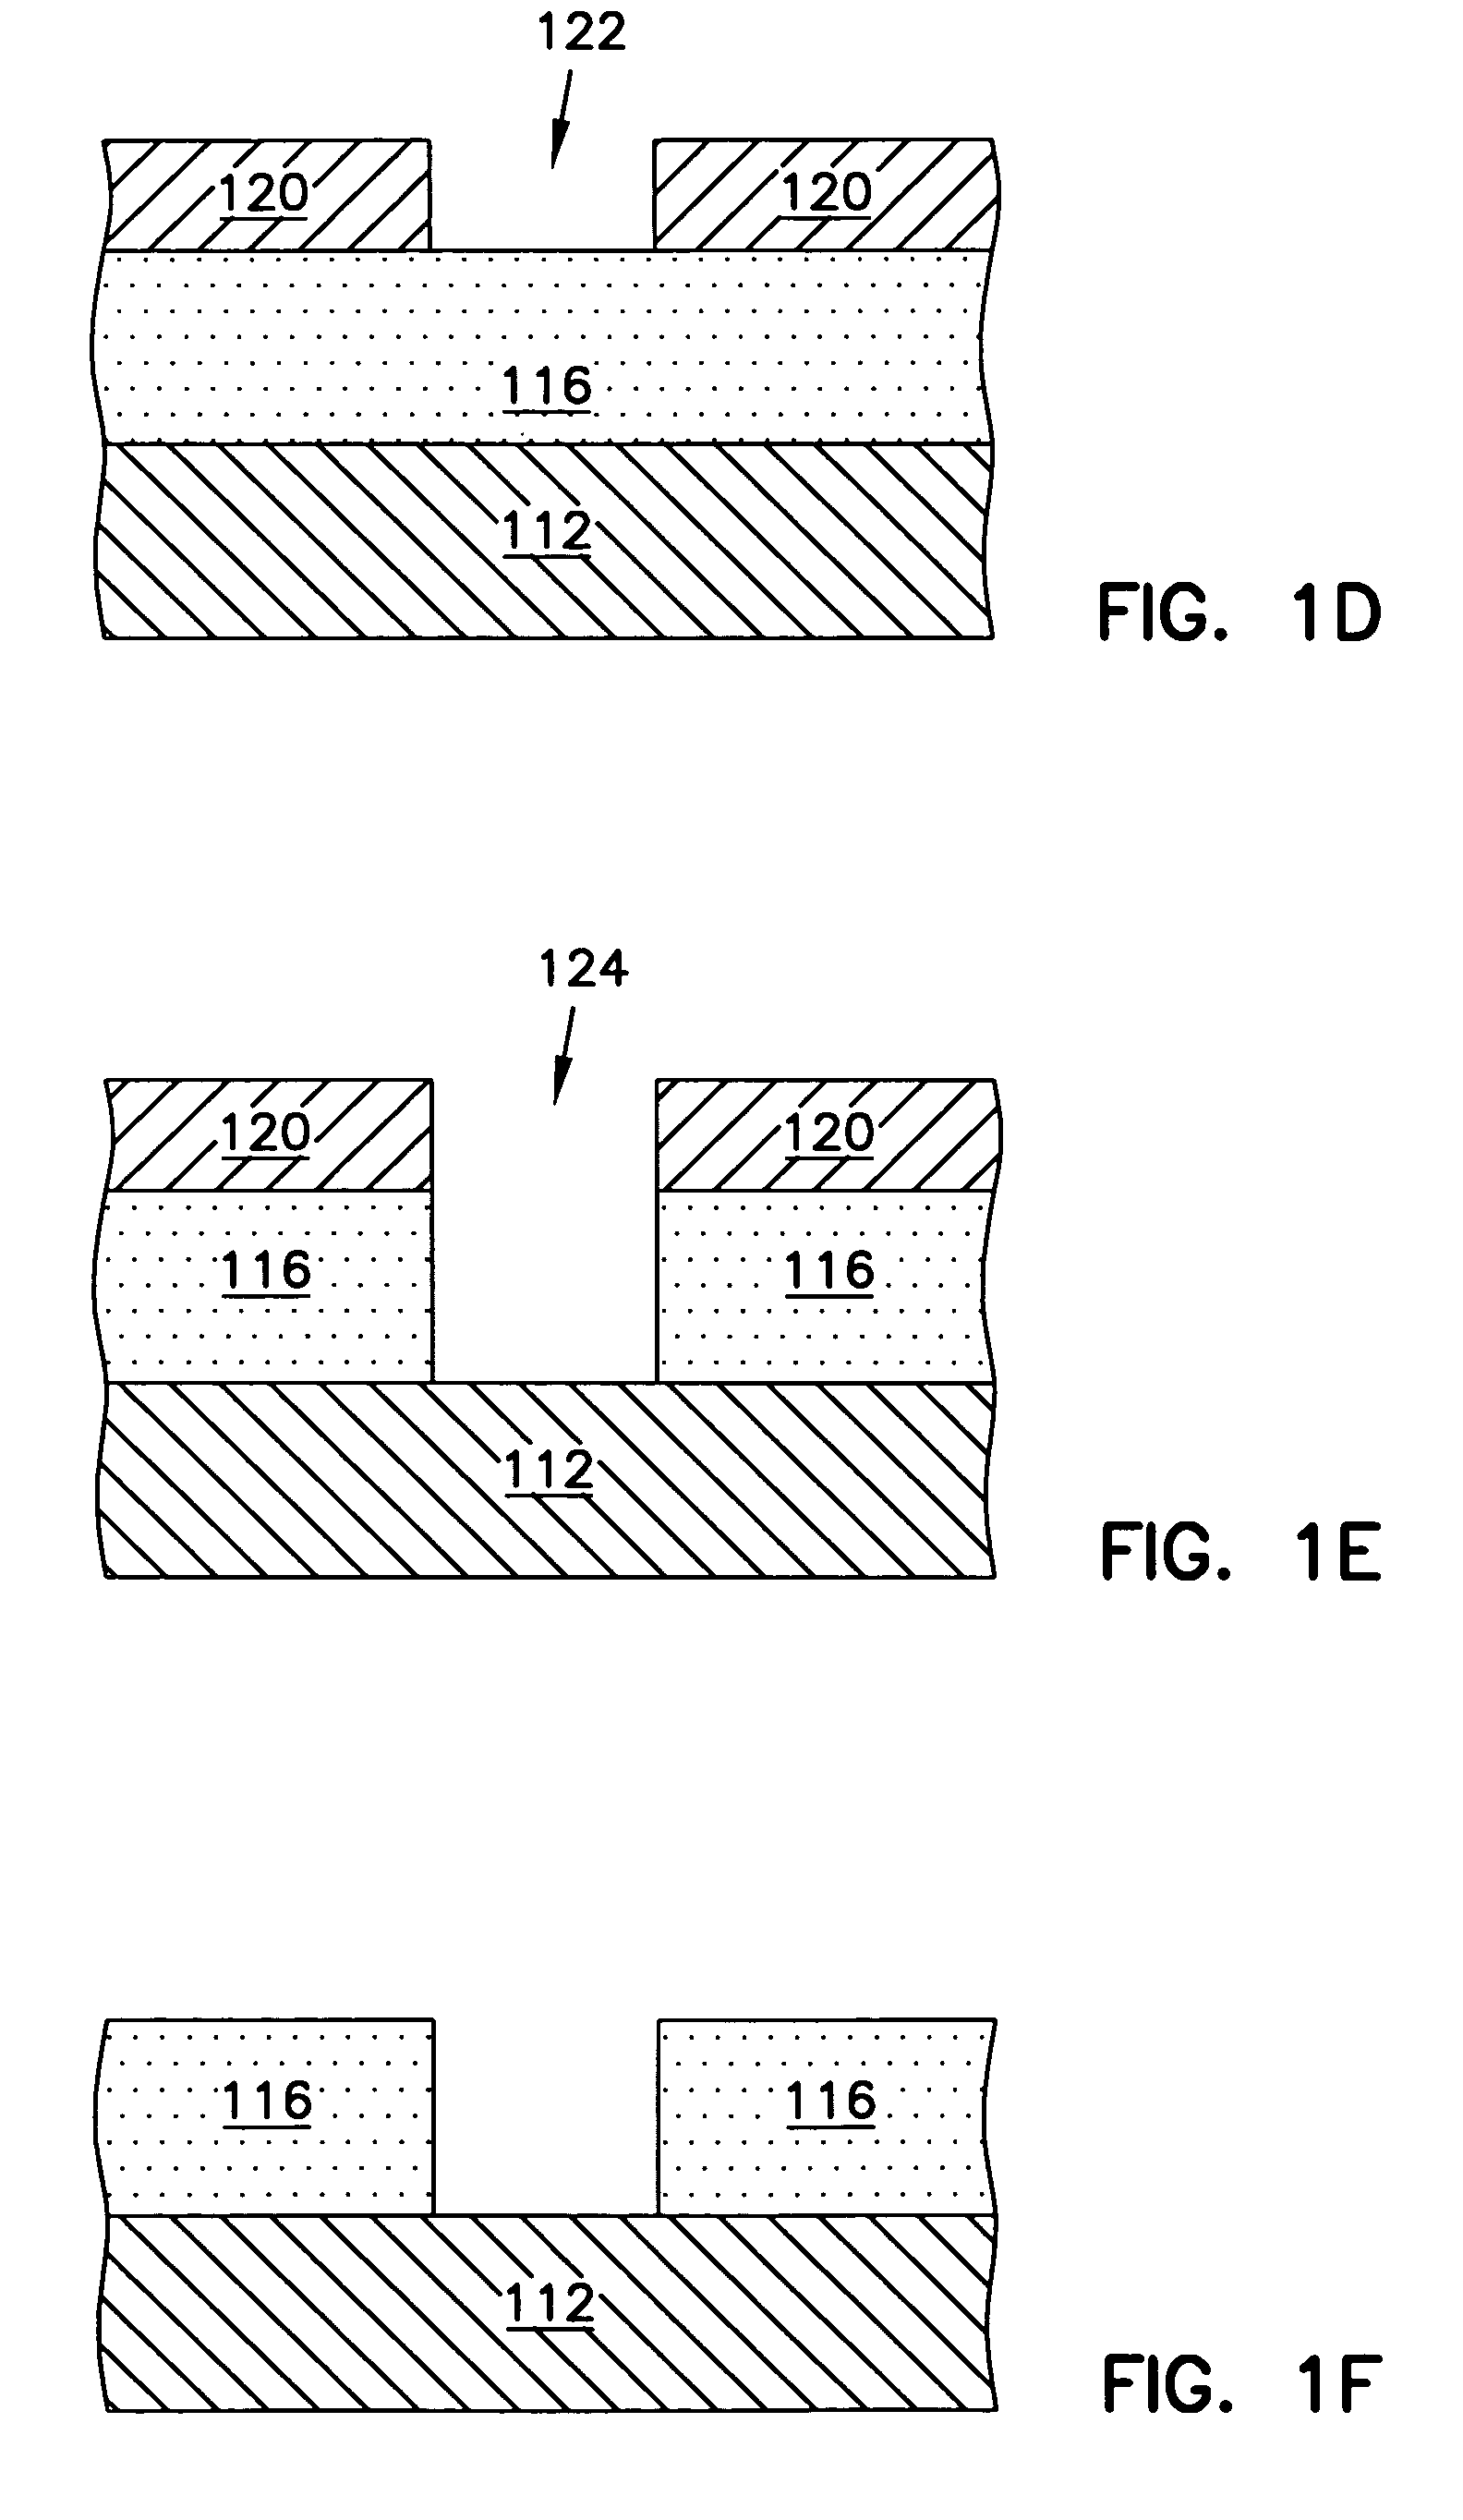 Polynorbornene foam insulation for integrated circuits